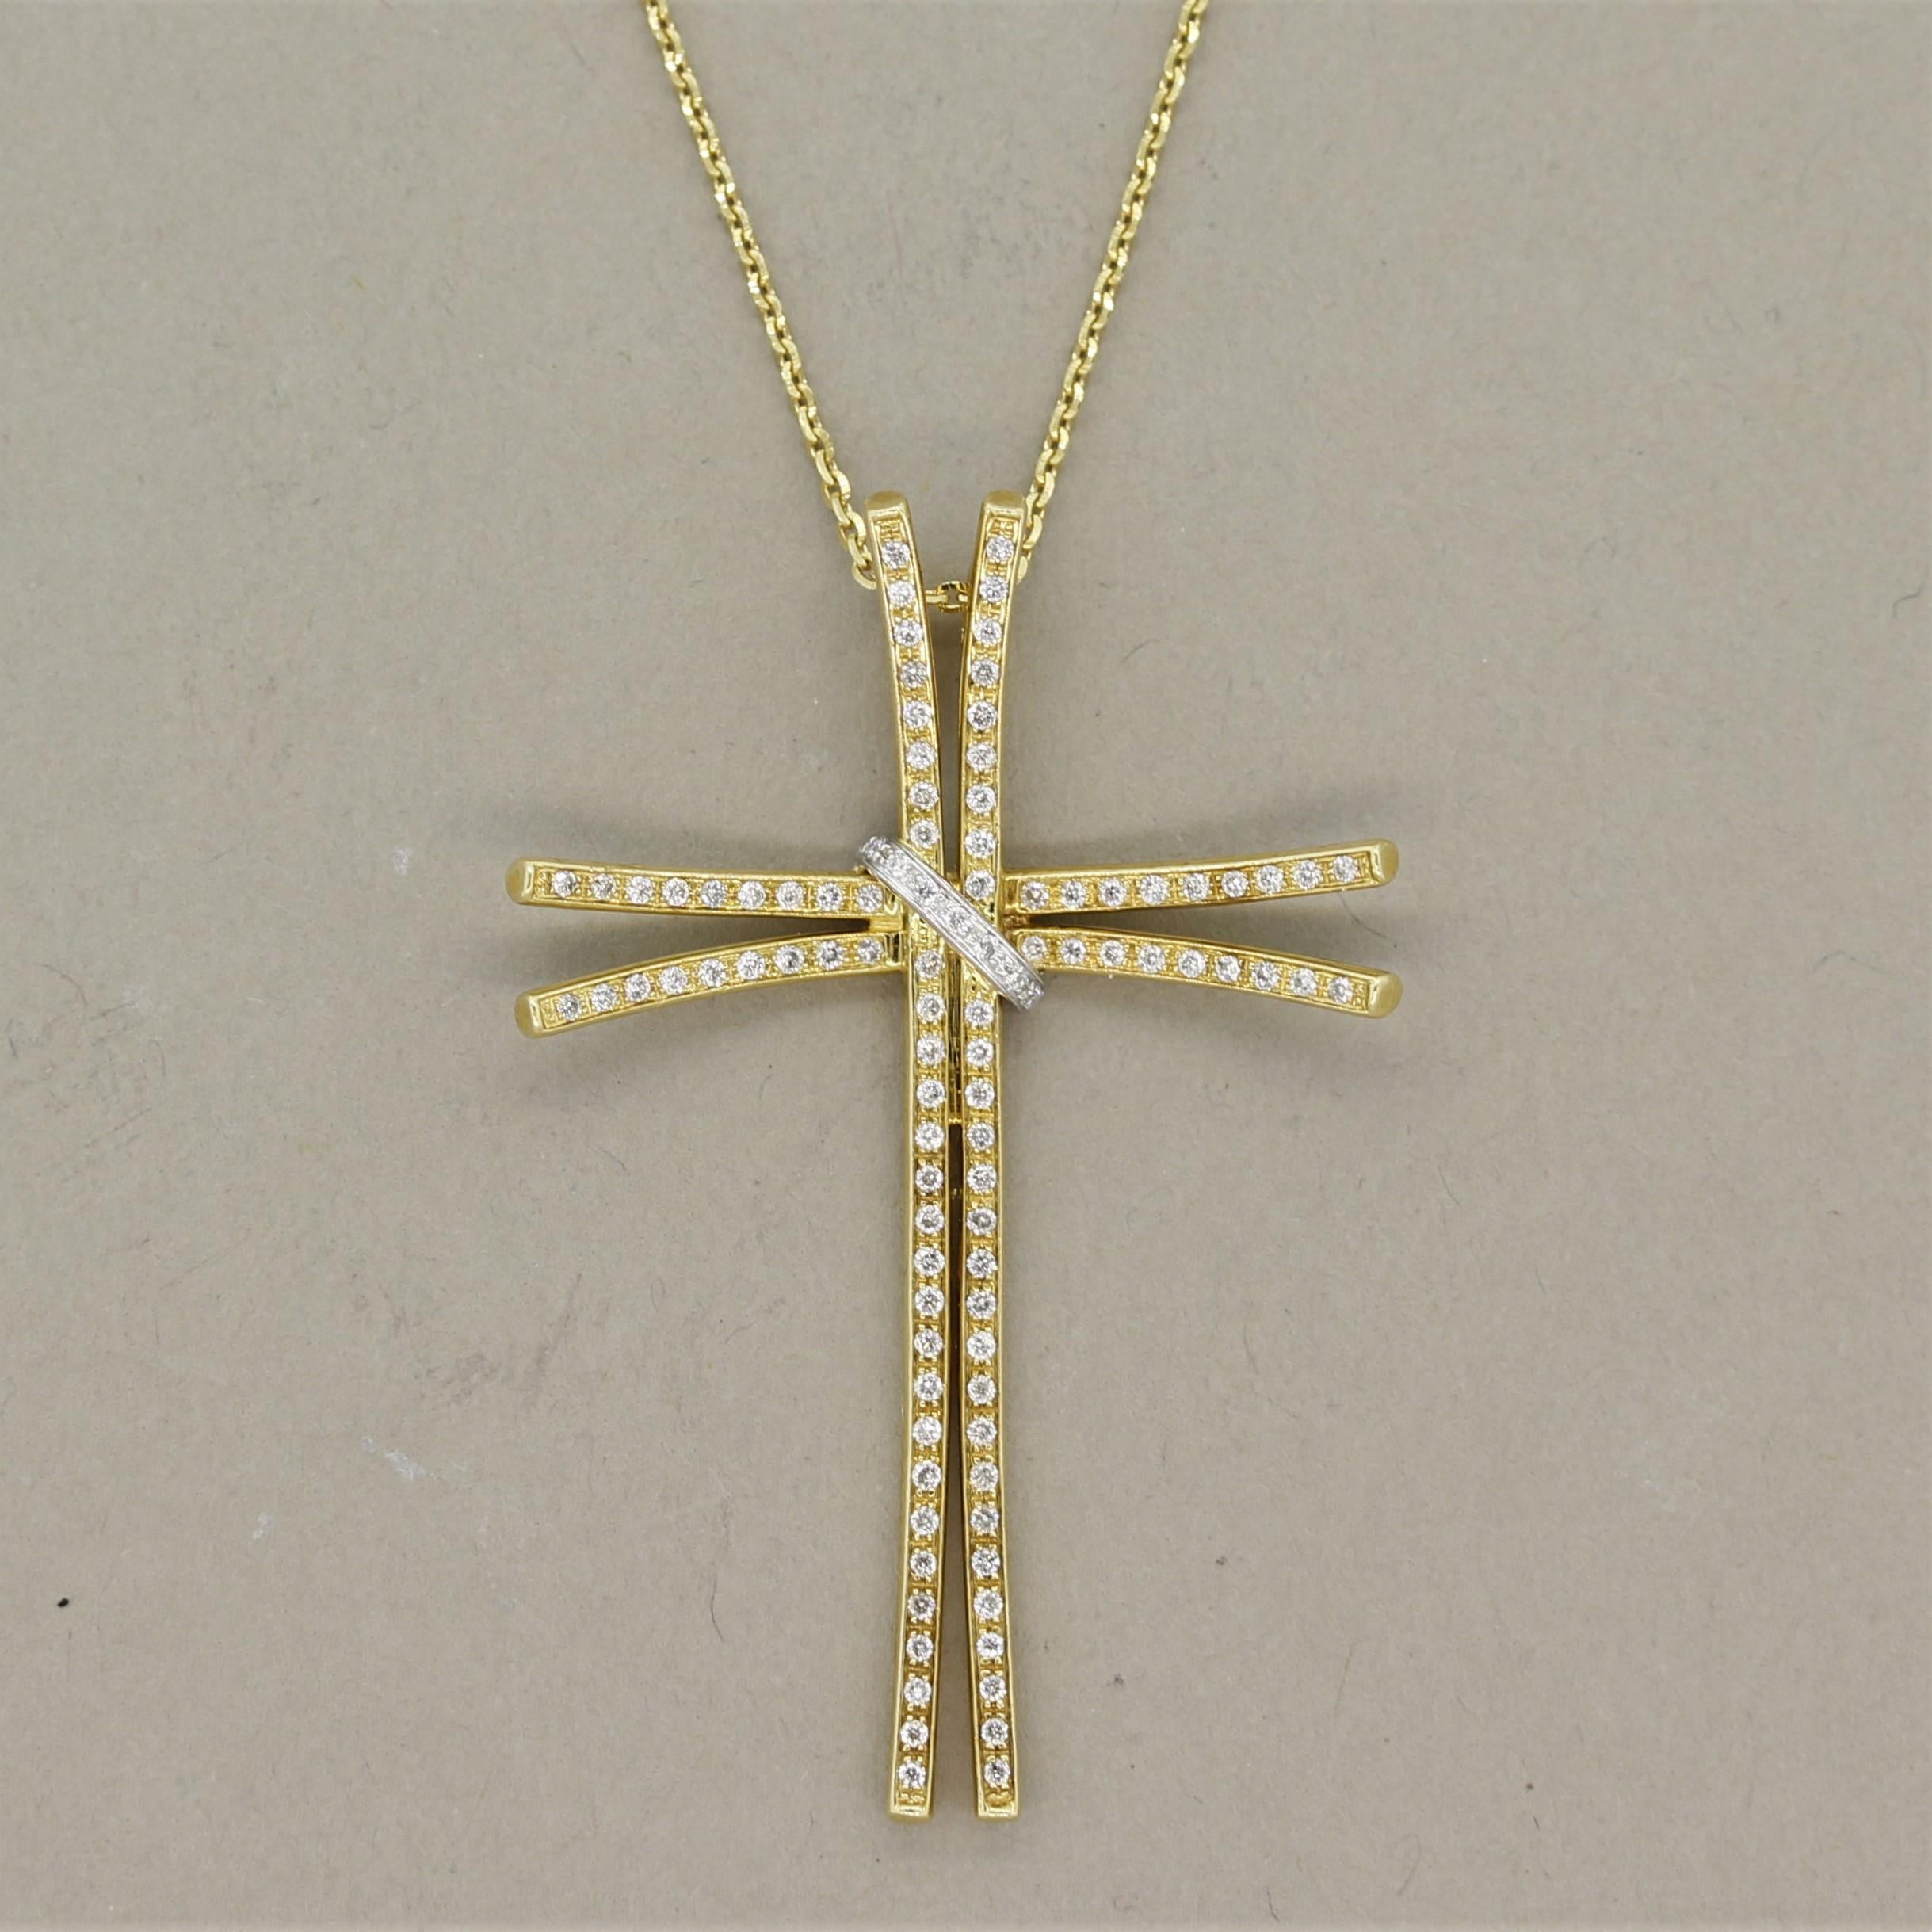 A unique take on the classic cross pendant. This cross features 0.42 carats of round brilliant cut diamonds set over 18k yellow gold along with a white gold tie that adjoins the crosses at their meeting point. This adds a slight two-tone gold look